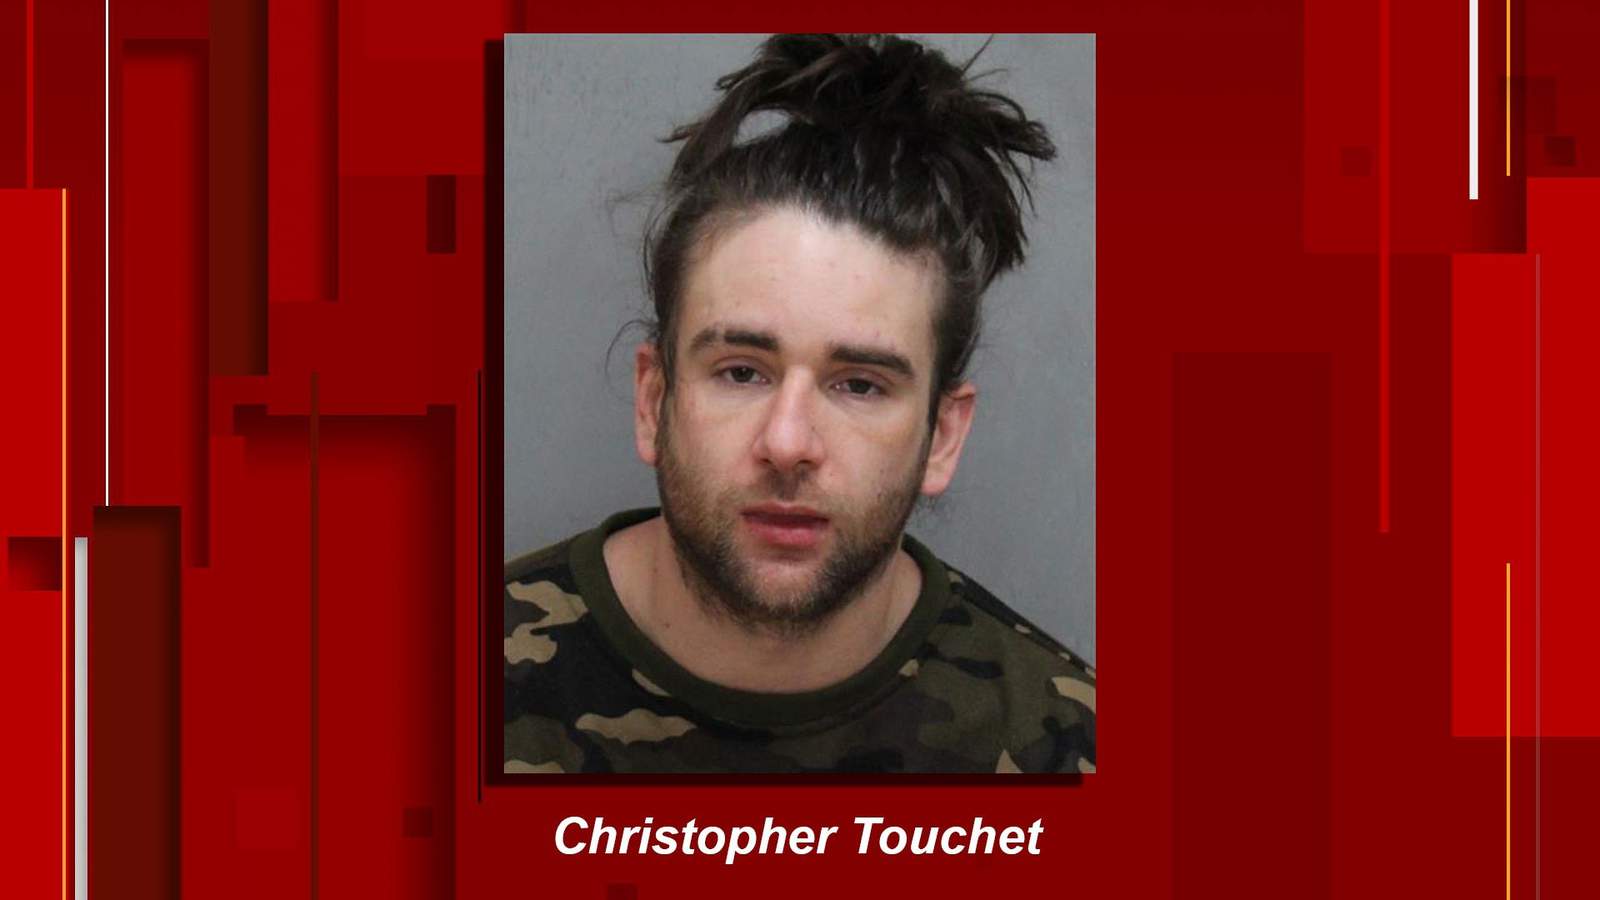 Man facing felony charges after barricading himself inside Christiansburg home for 2.5 hours